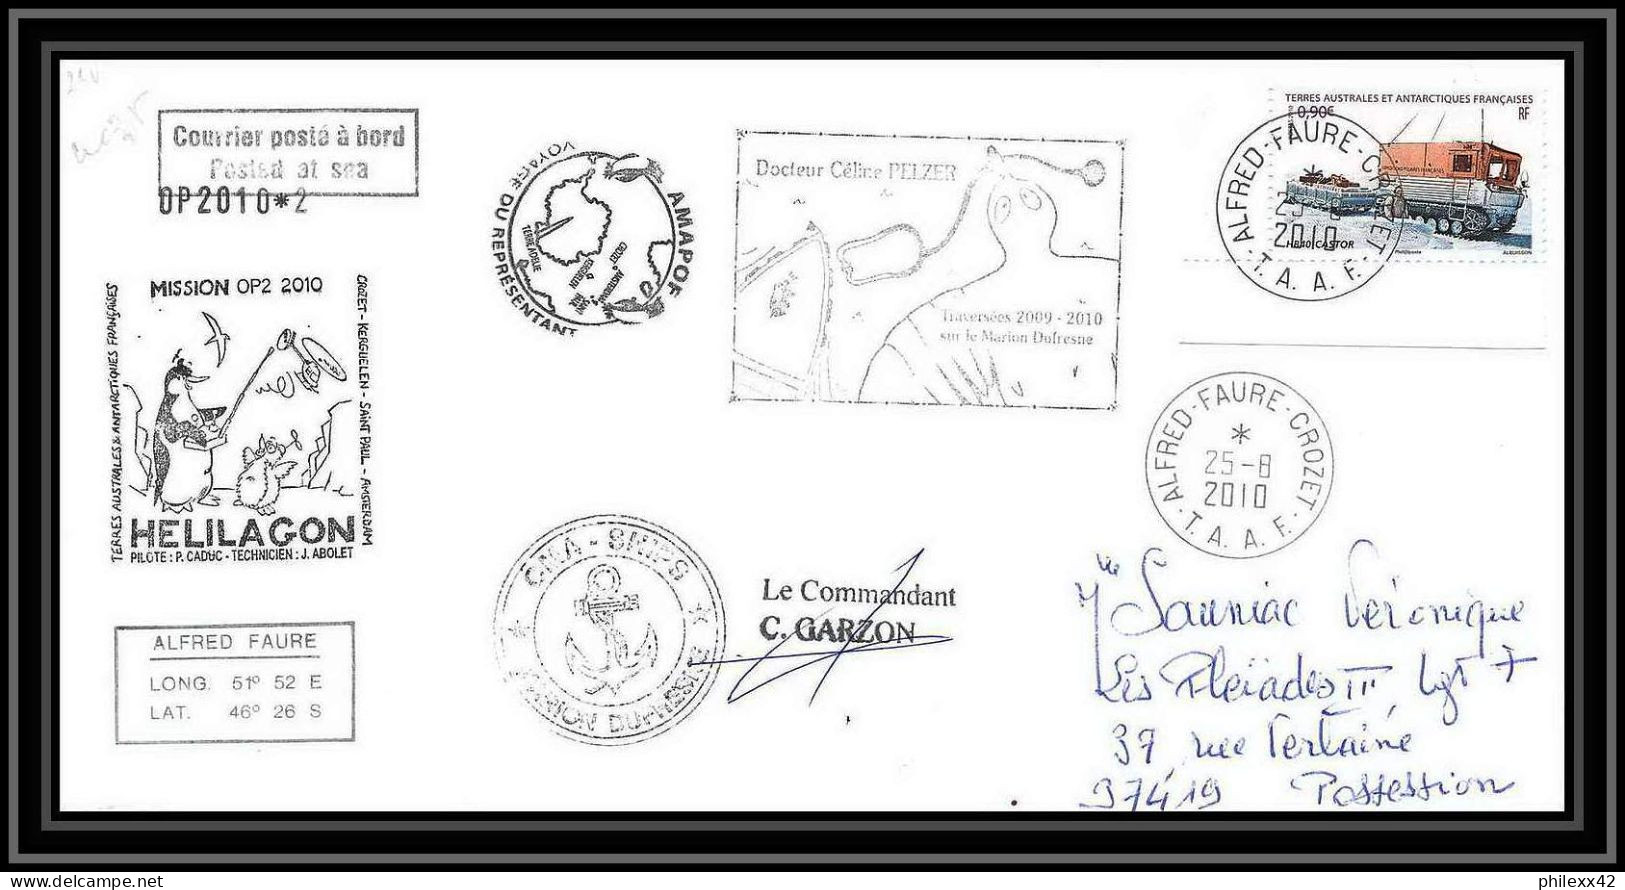 3016 Helilagon Dufresne Signé Signed Op 2010/2 Crozet 25/8/2010 N°563 ANTARCTIC Terres Australes (taaf) Lettre Cover - Hélicoptères